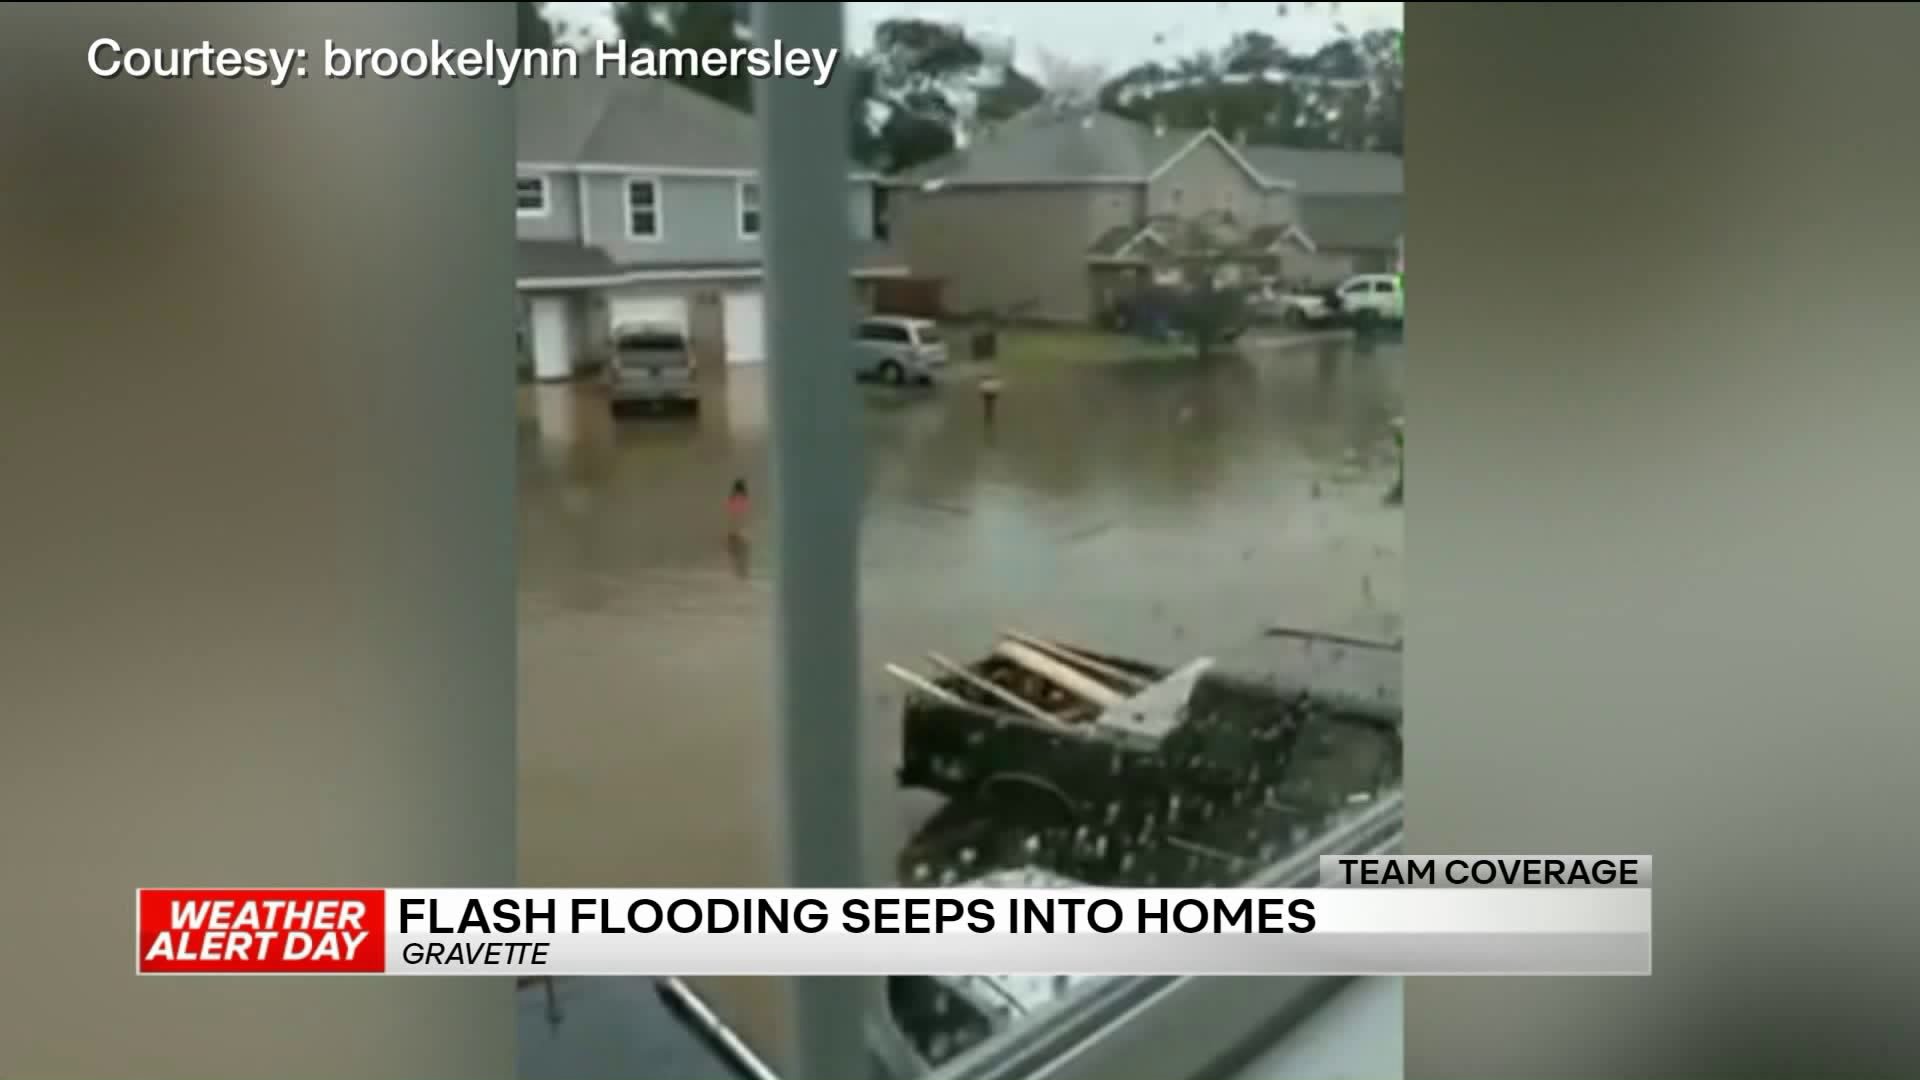 Flash Floods Impacts Homes In Gravette